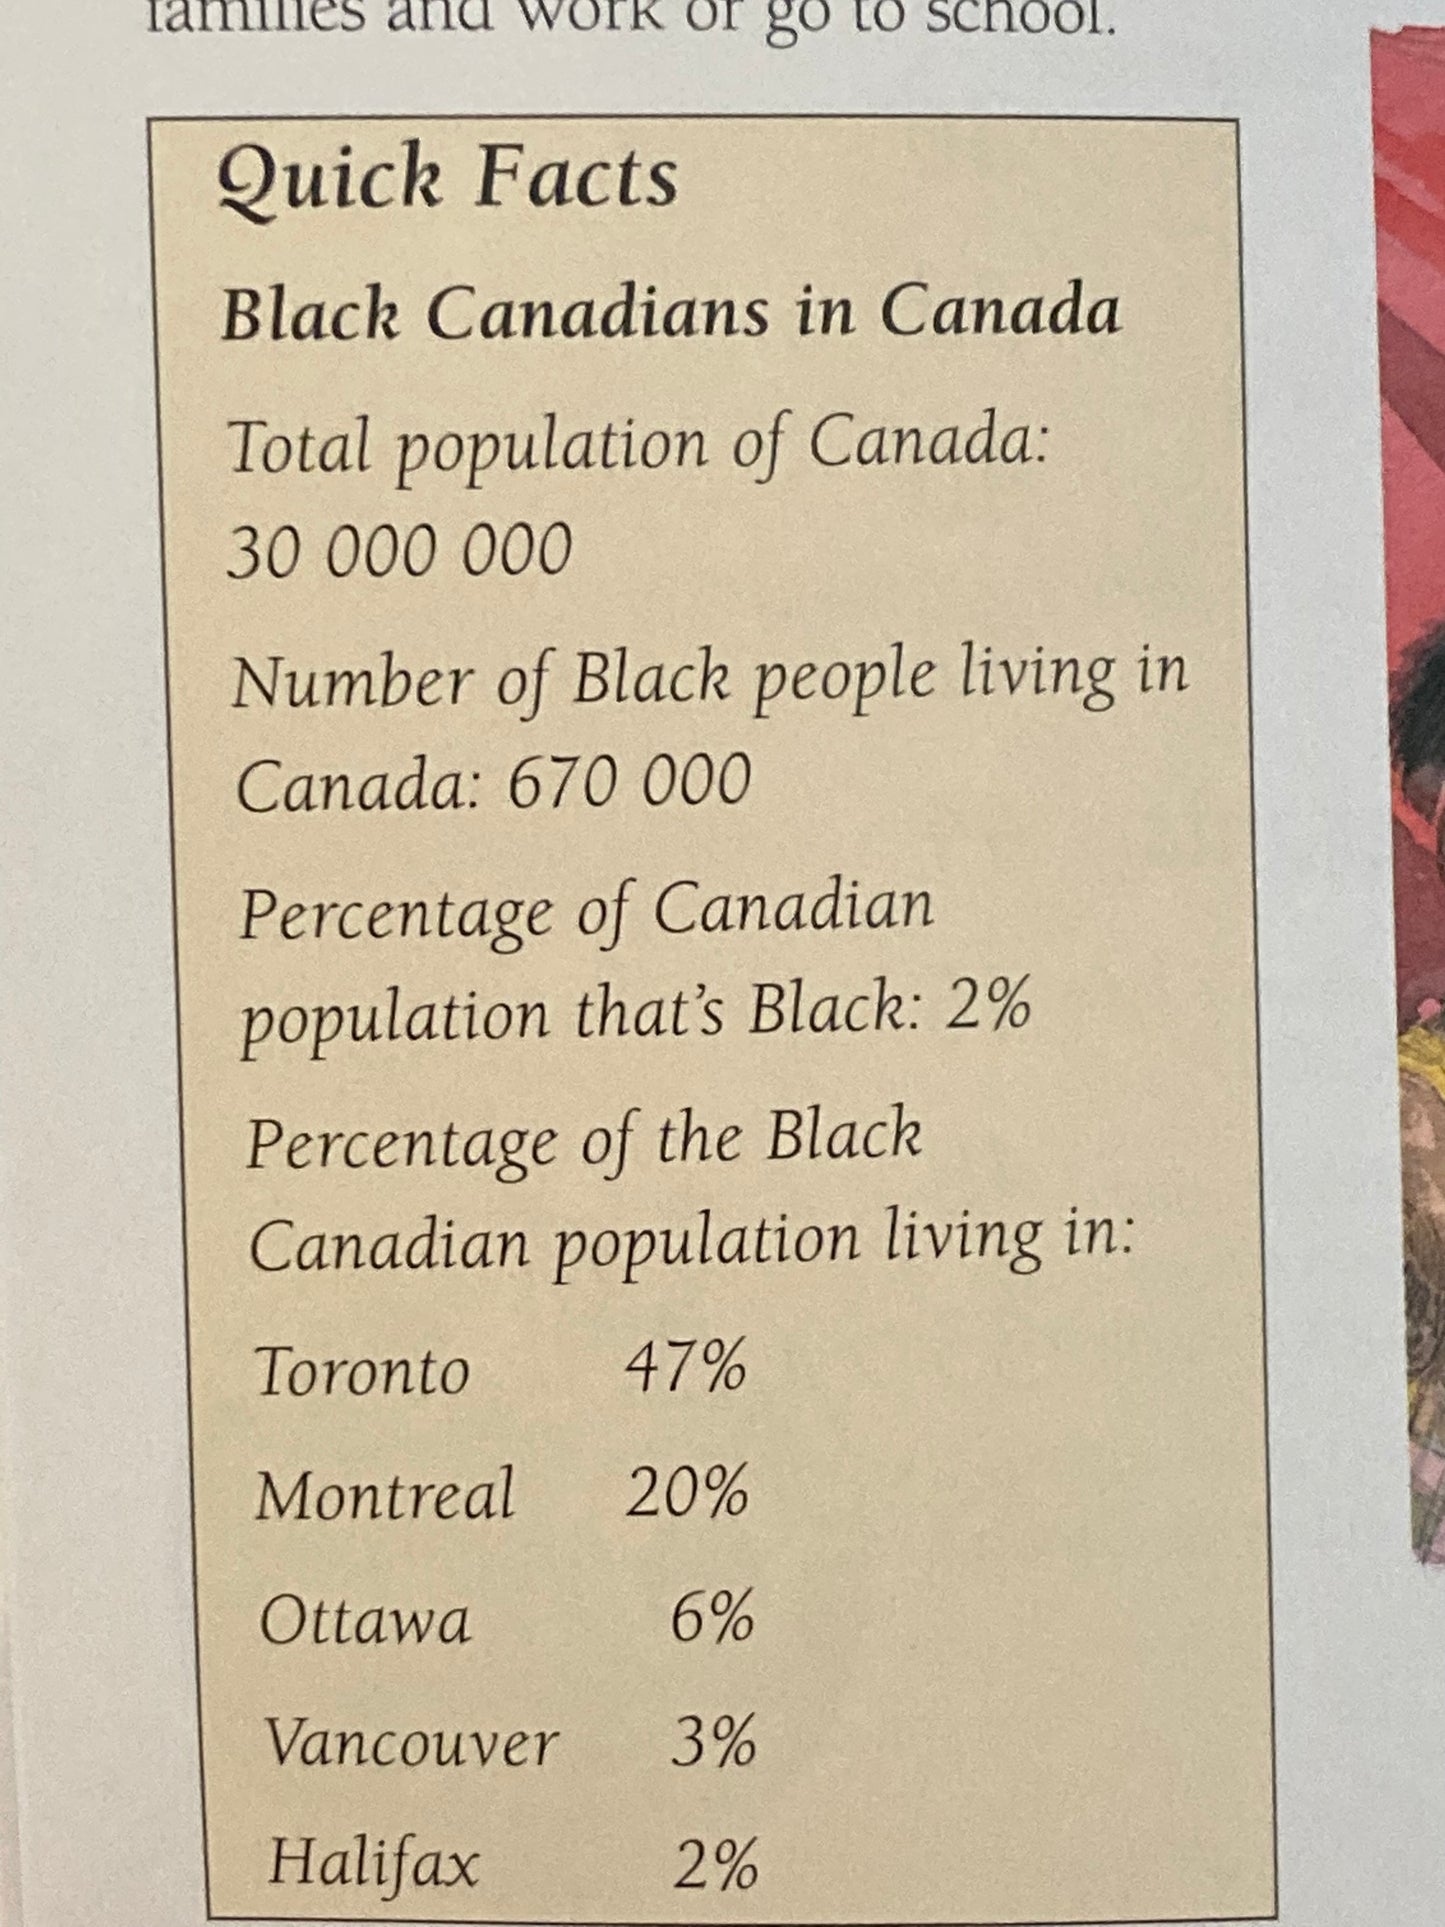 Educational Book - The Kids Book of BLACK CANADIAN HISTORY